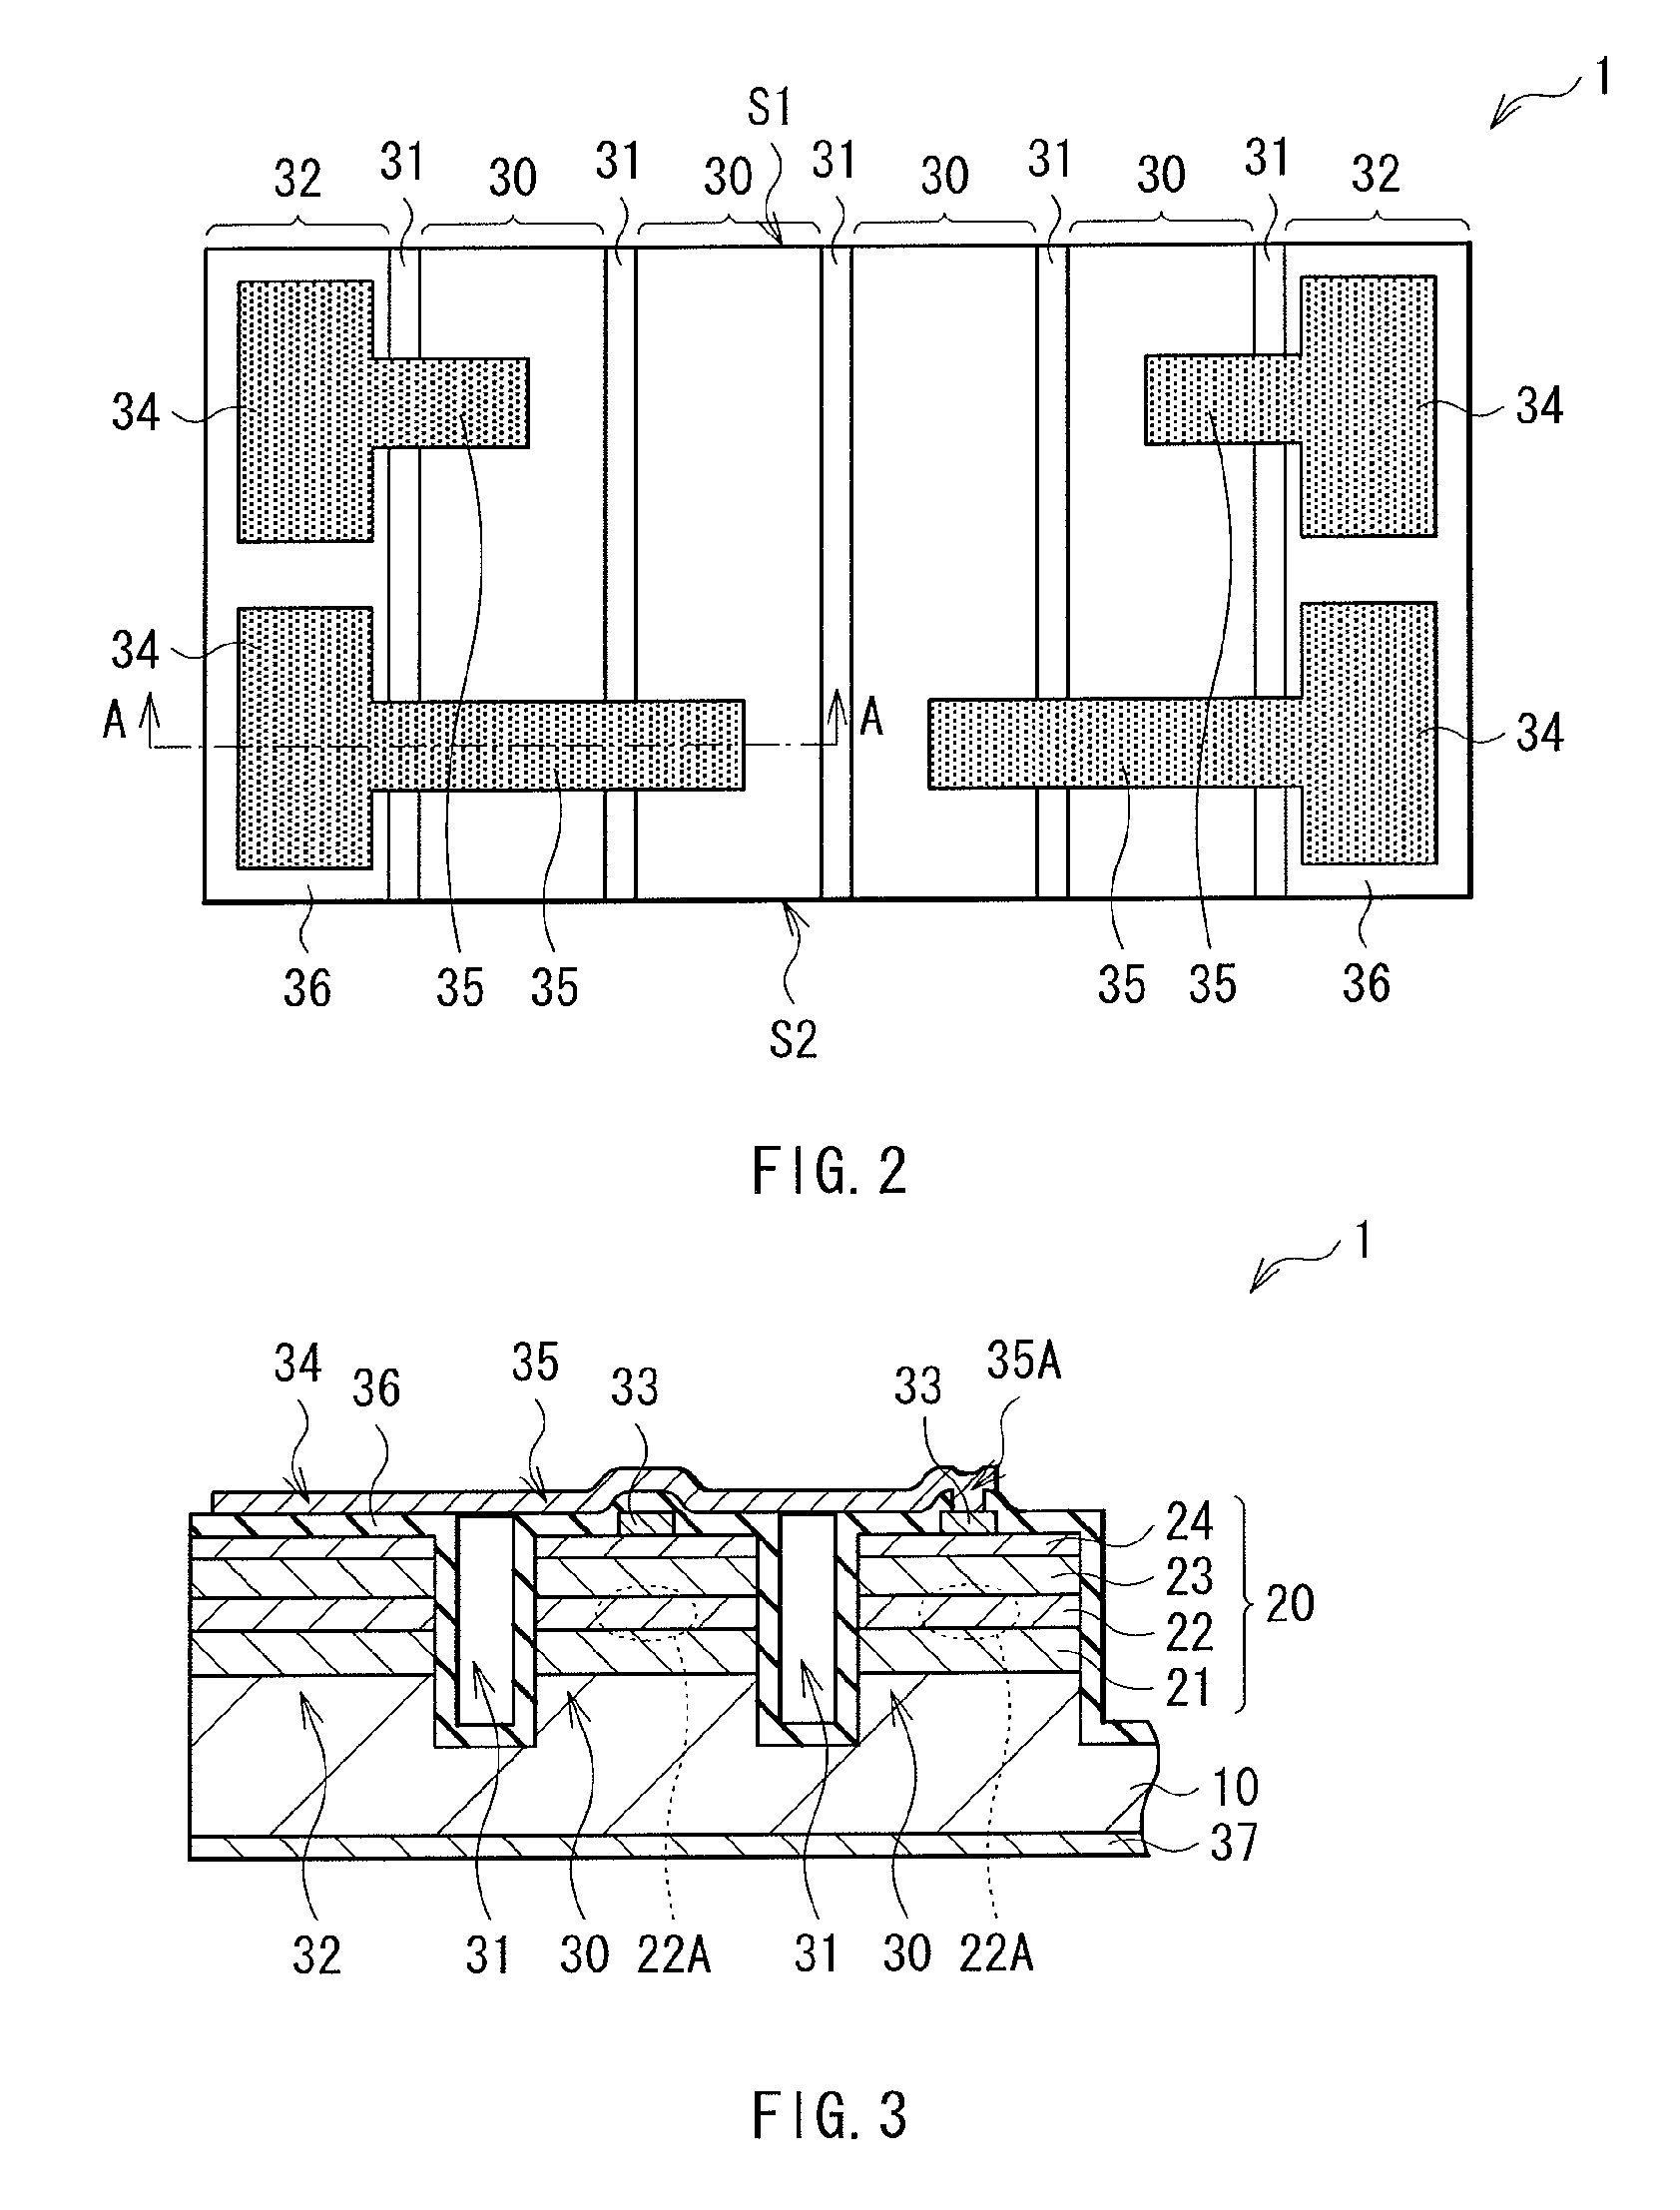 Semiconductor laser